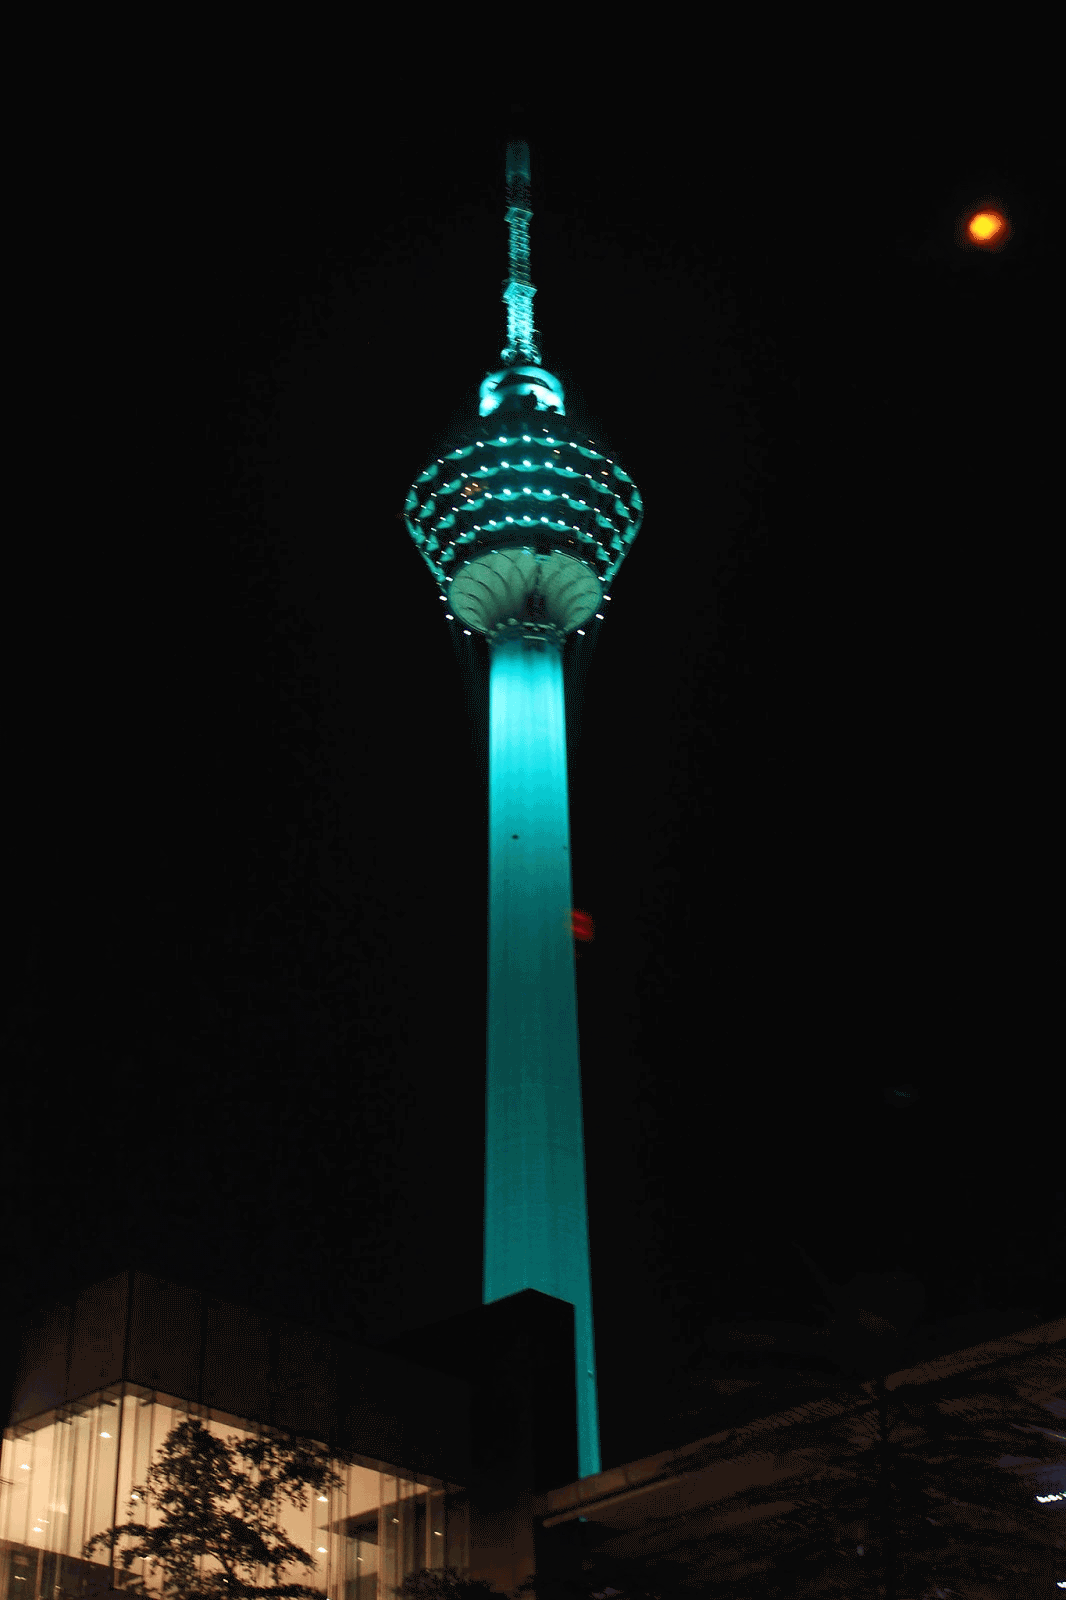 The View Of The Kuala Lumpur Tower At Night